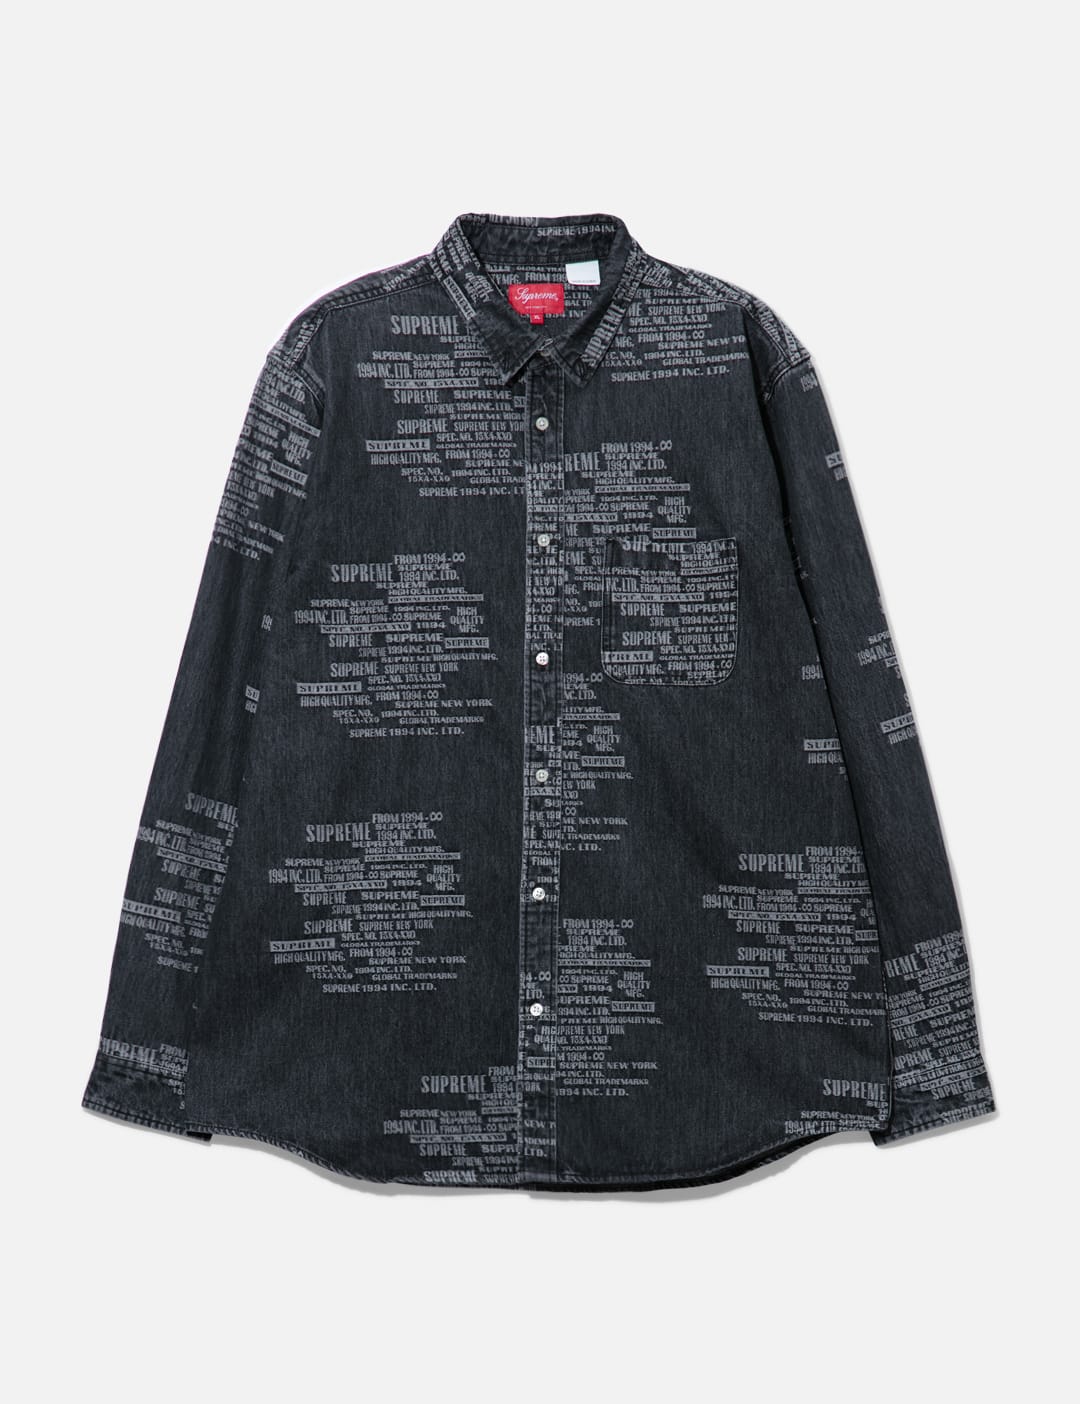 Supreme - Denim Shirt with Embroidery | HBX - Globally Curated